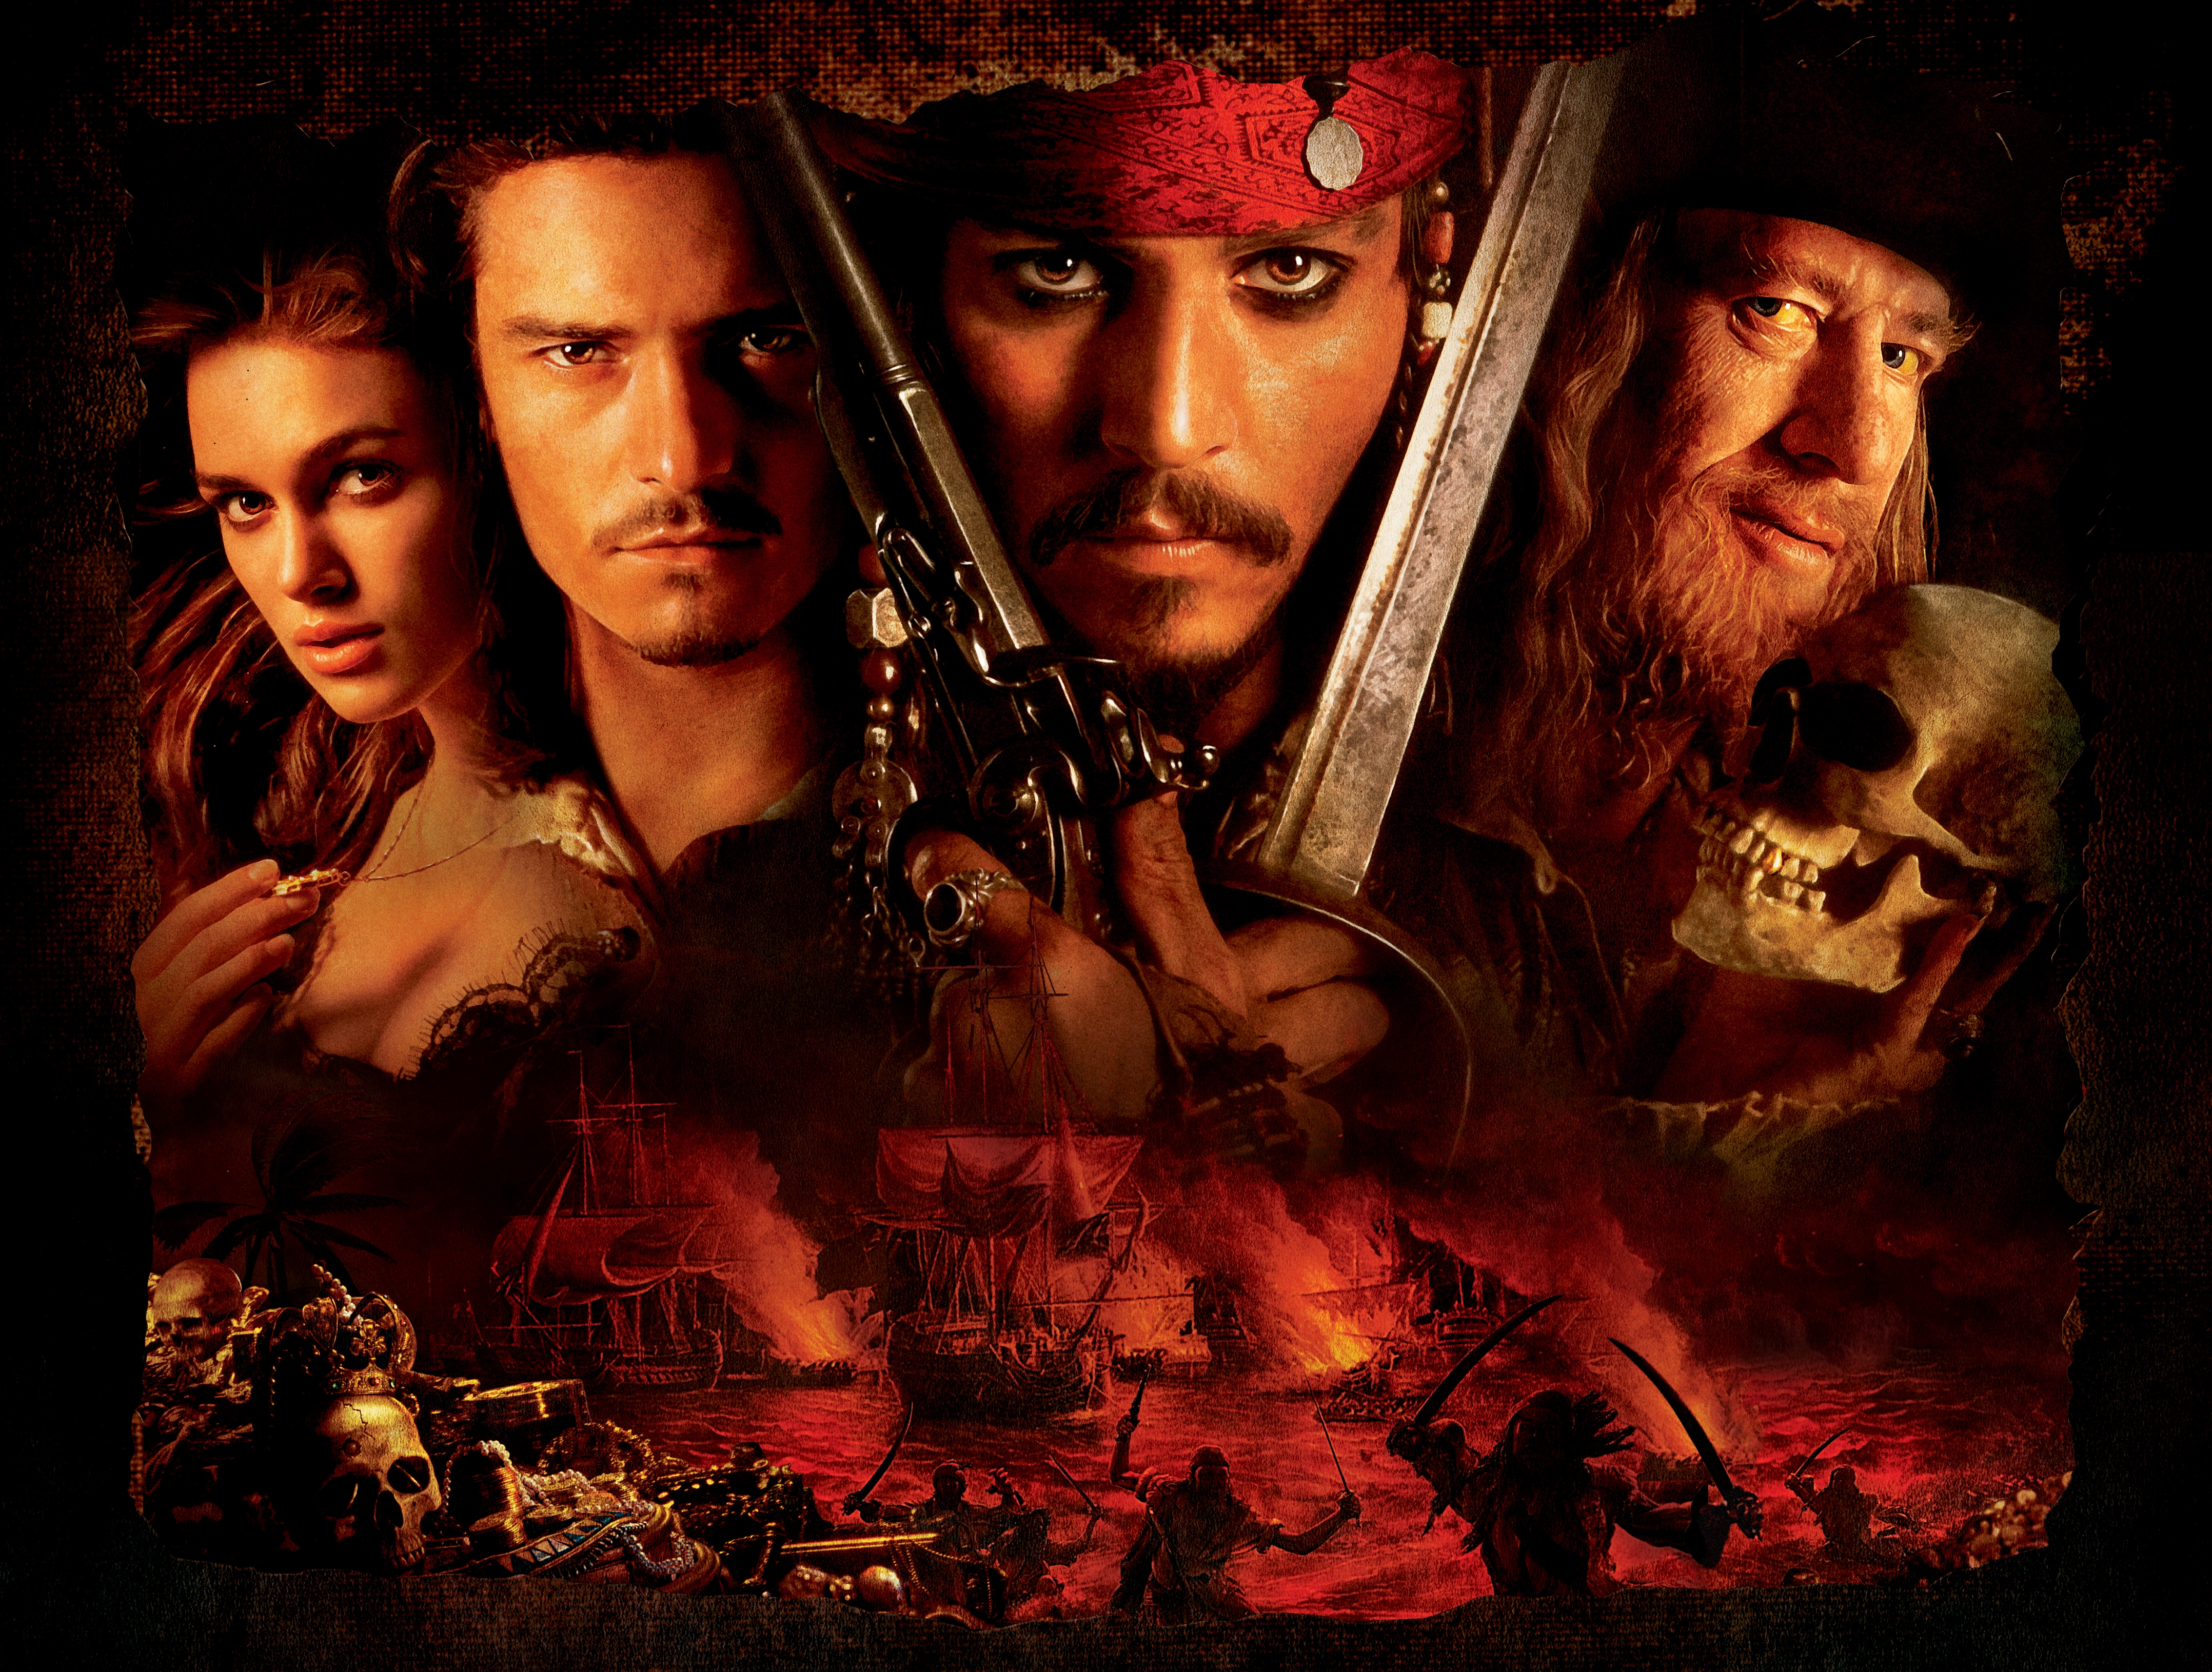 jack sparrow, movie, pirates of the caribbean: the curse of the black pearl, elizabeth swann, geoffrey rush, hector barbossa, johnny depp, keira knightley, orlando bloom, will turner, pirates of the caribbean